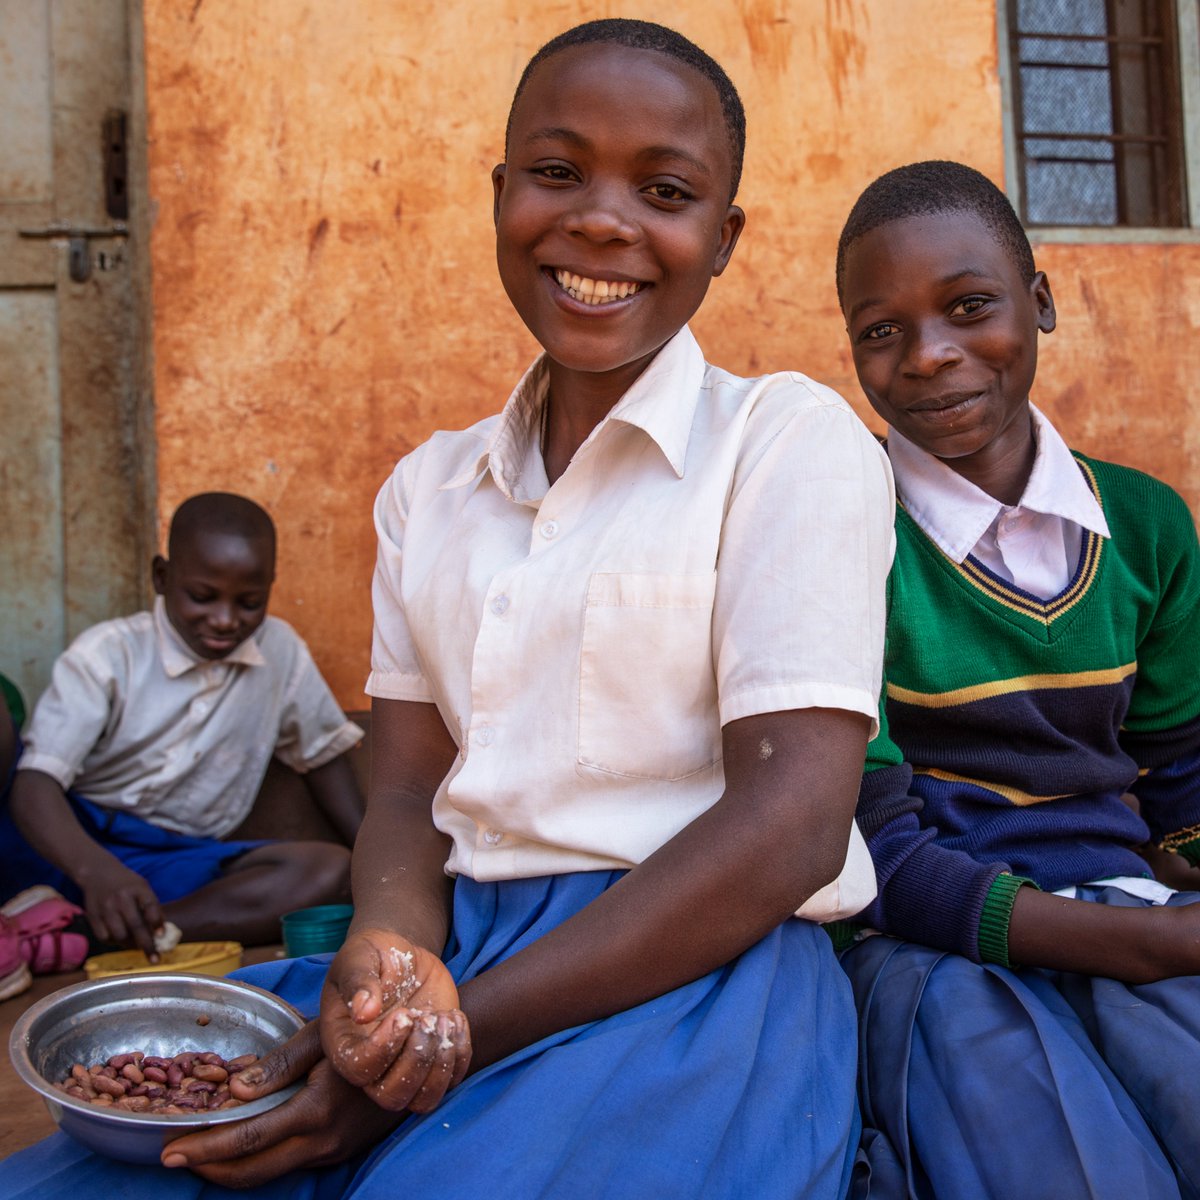 Empowering children with knowledge & nutrition education is key to a brighter future 📚 🥘 💪

#WFP #ZeroHunger #LeaveNoOneBehind